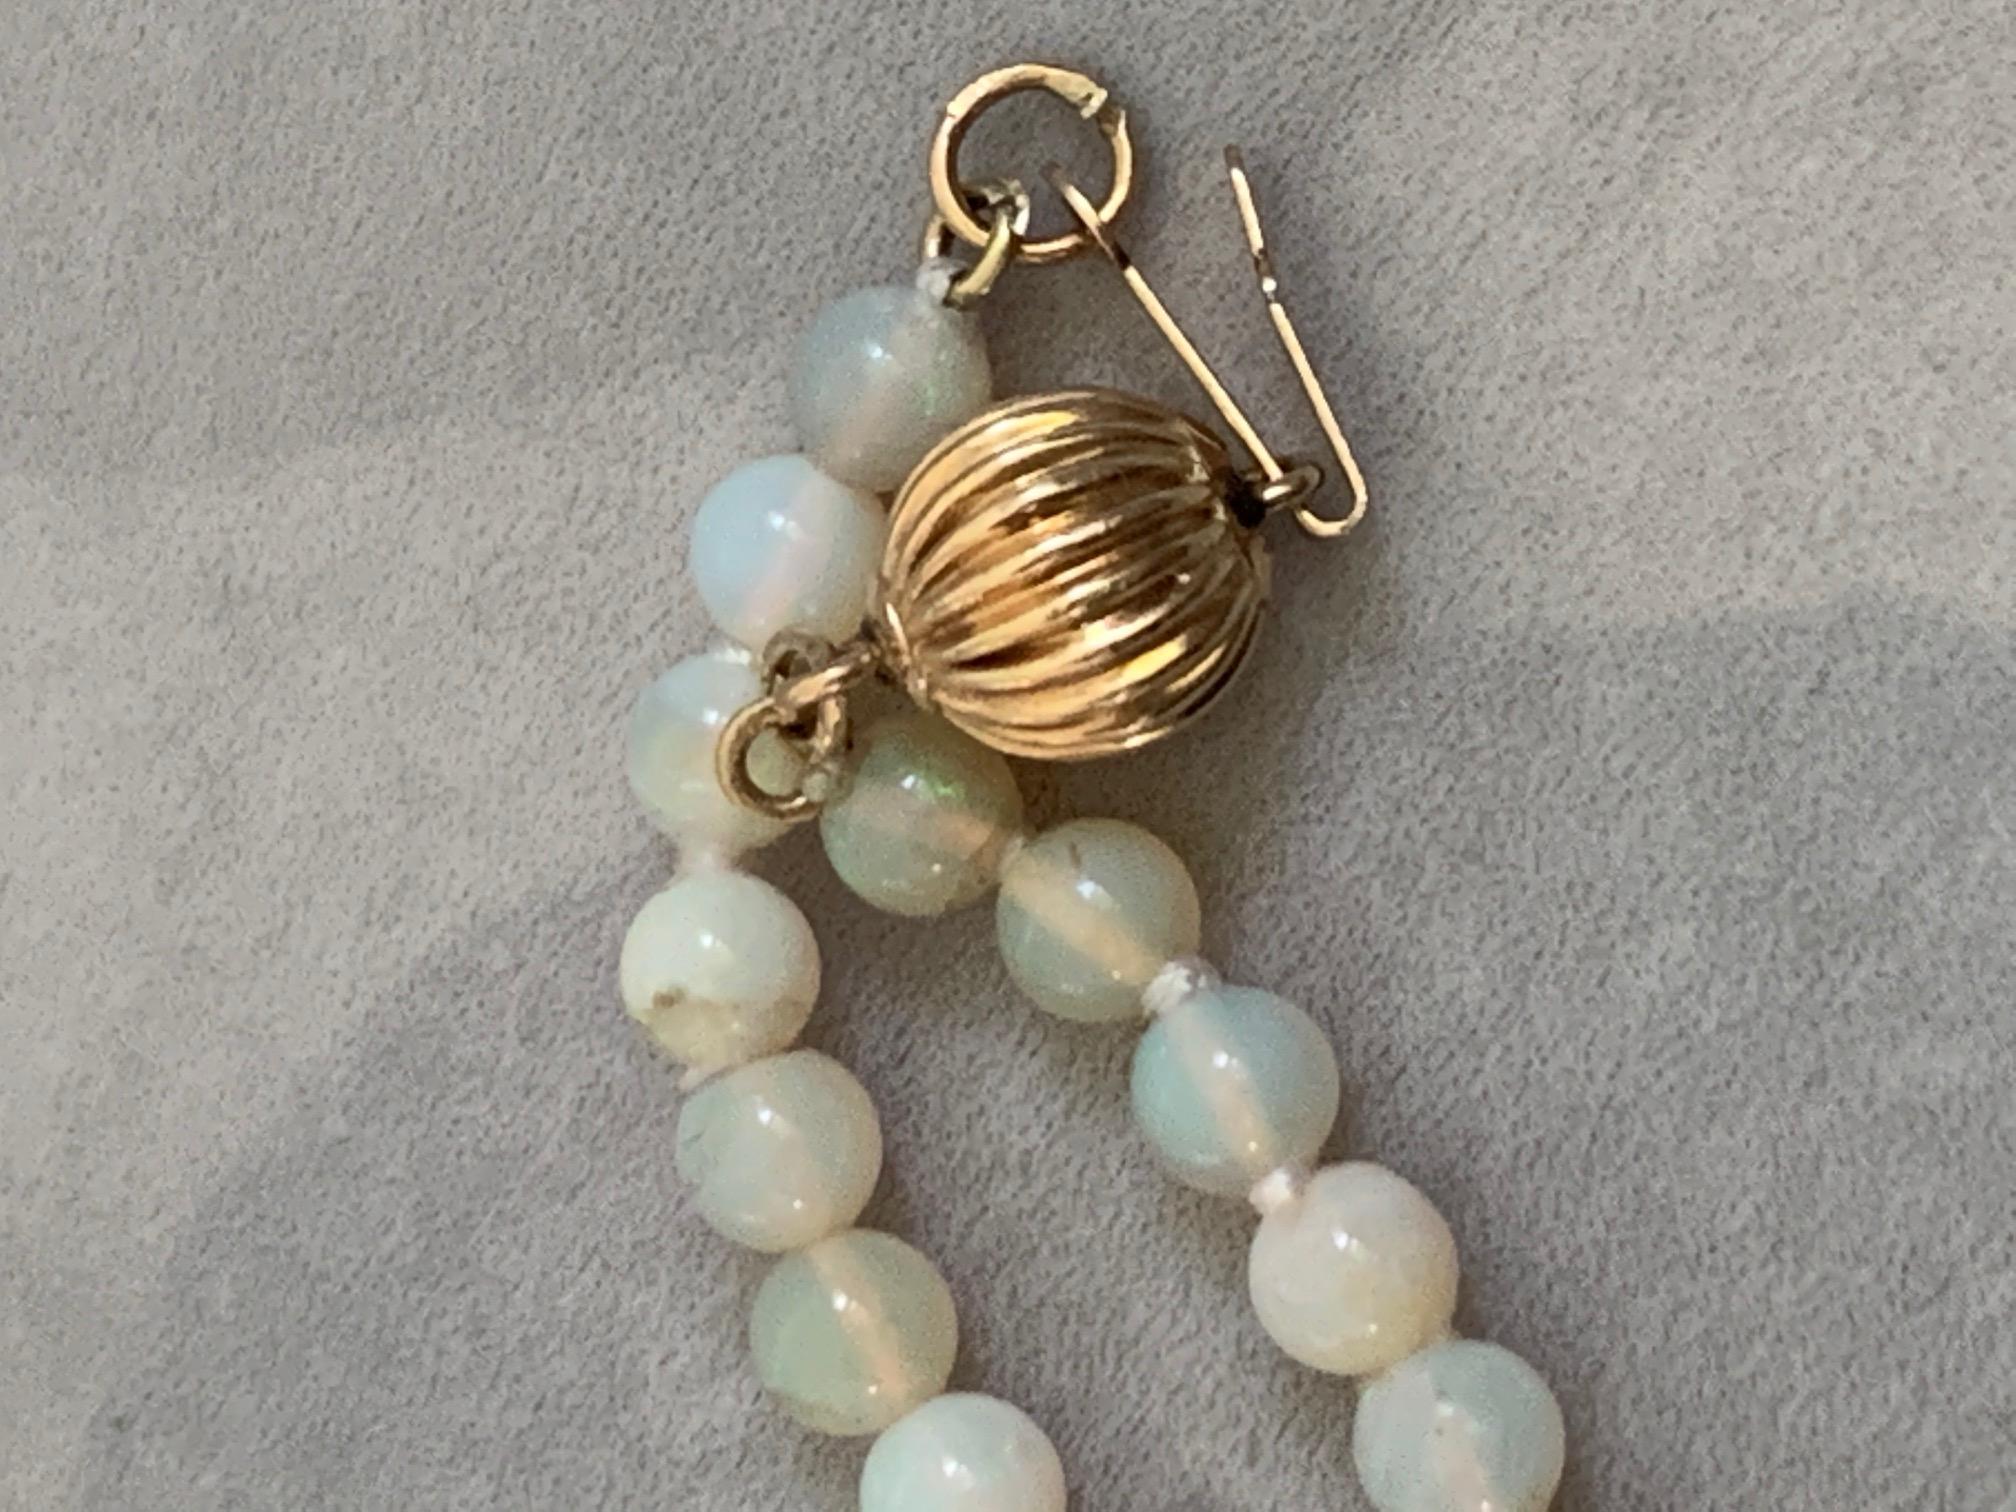 opal ball necklace